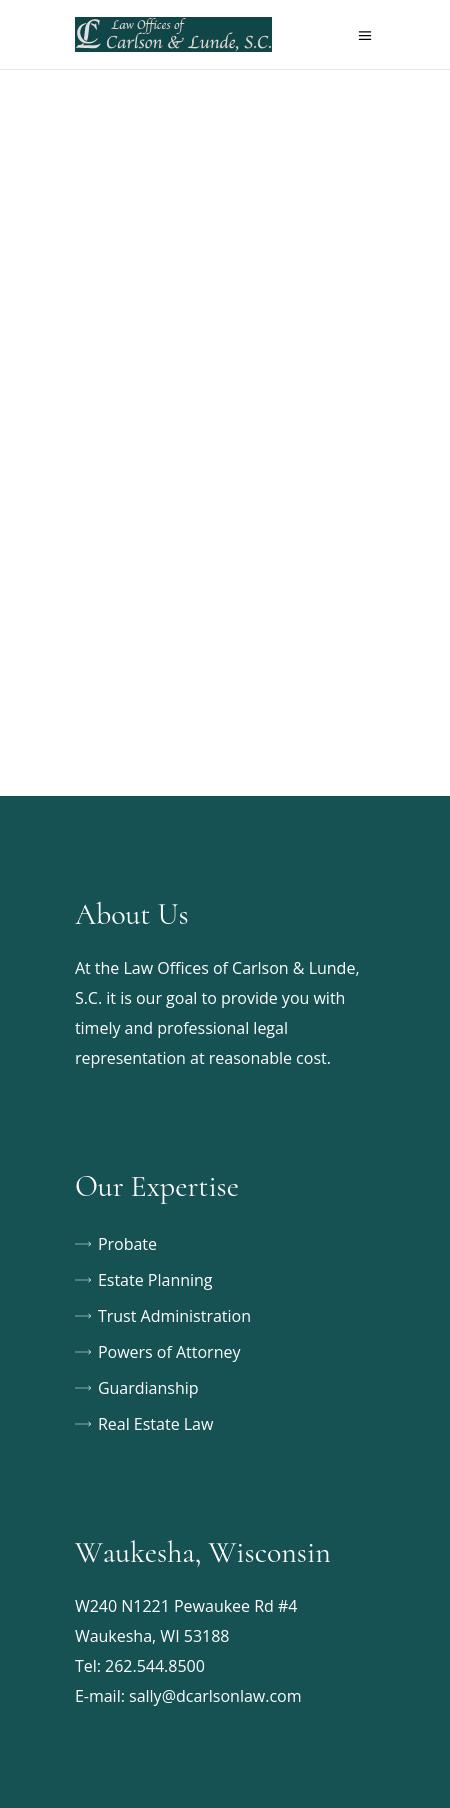 Law Offices of David J. Carlson S.C. - Waukesha WI Lawyers